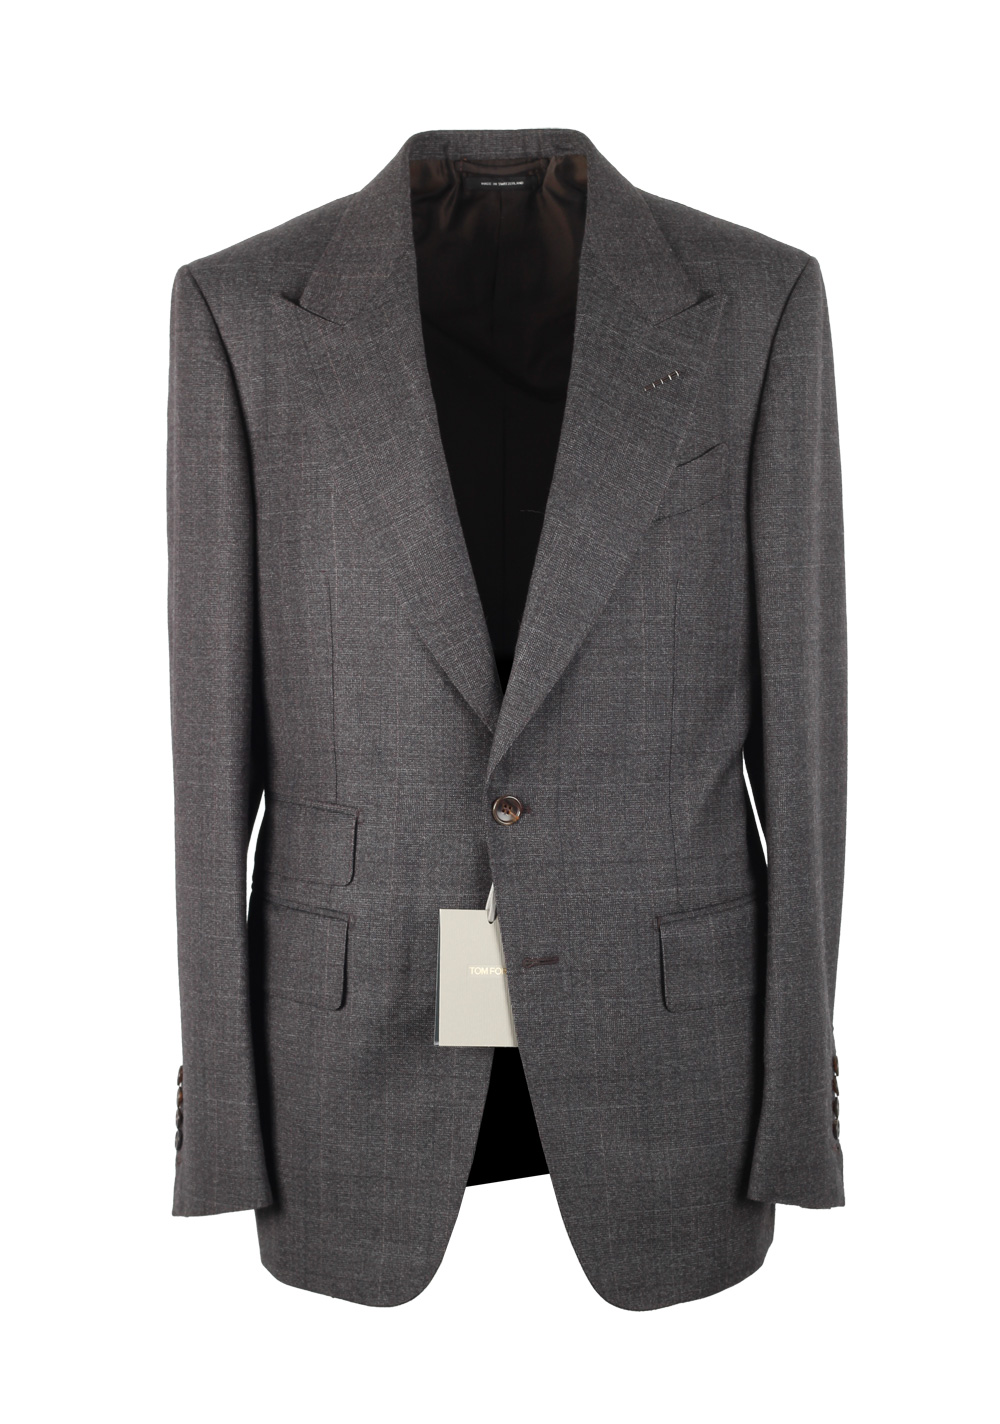 TOM FORD Shelton Checked Gray Suit Size 48 / 38R U.S. In Wool | Costume Limité